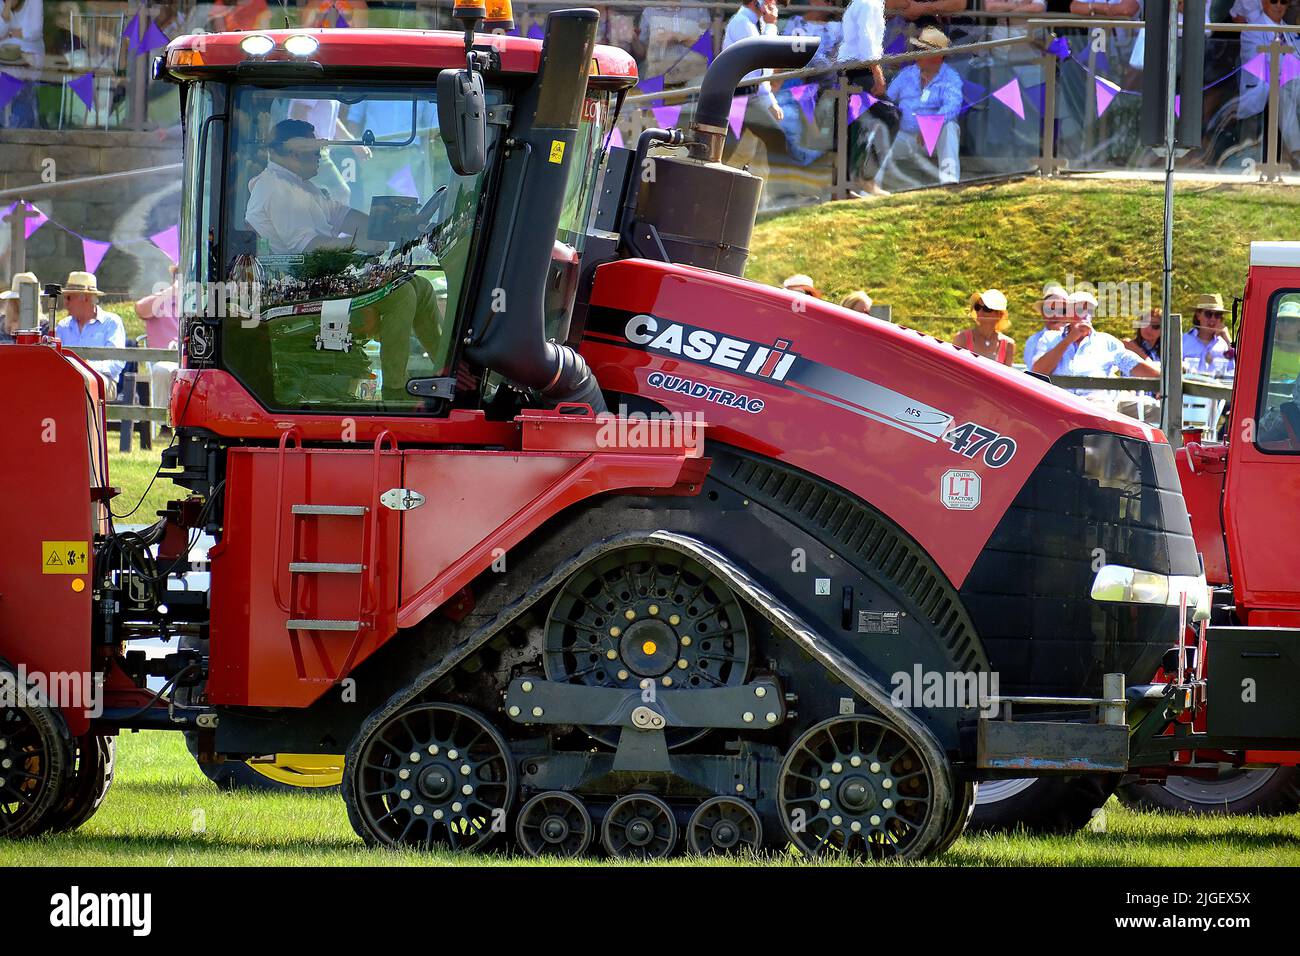 Tractors and implements on display at an agricultural show. Stock Photo